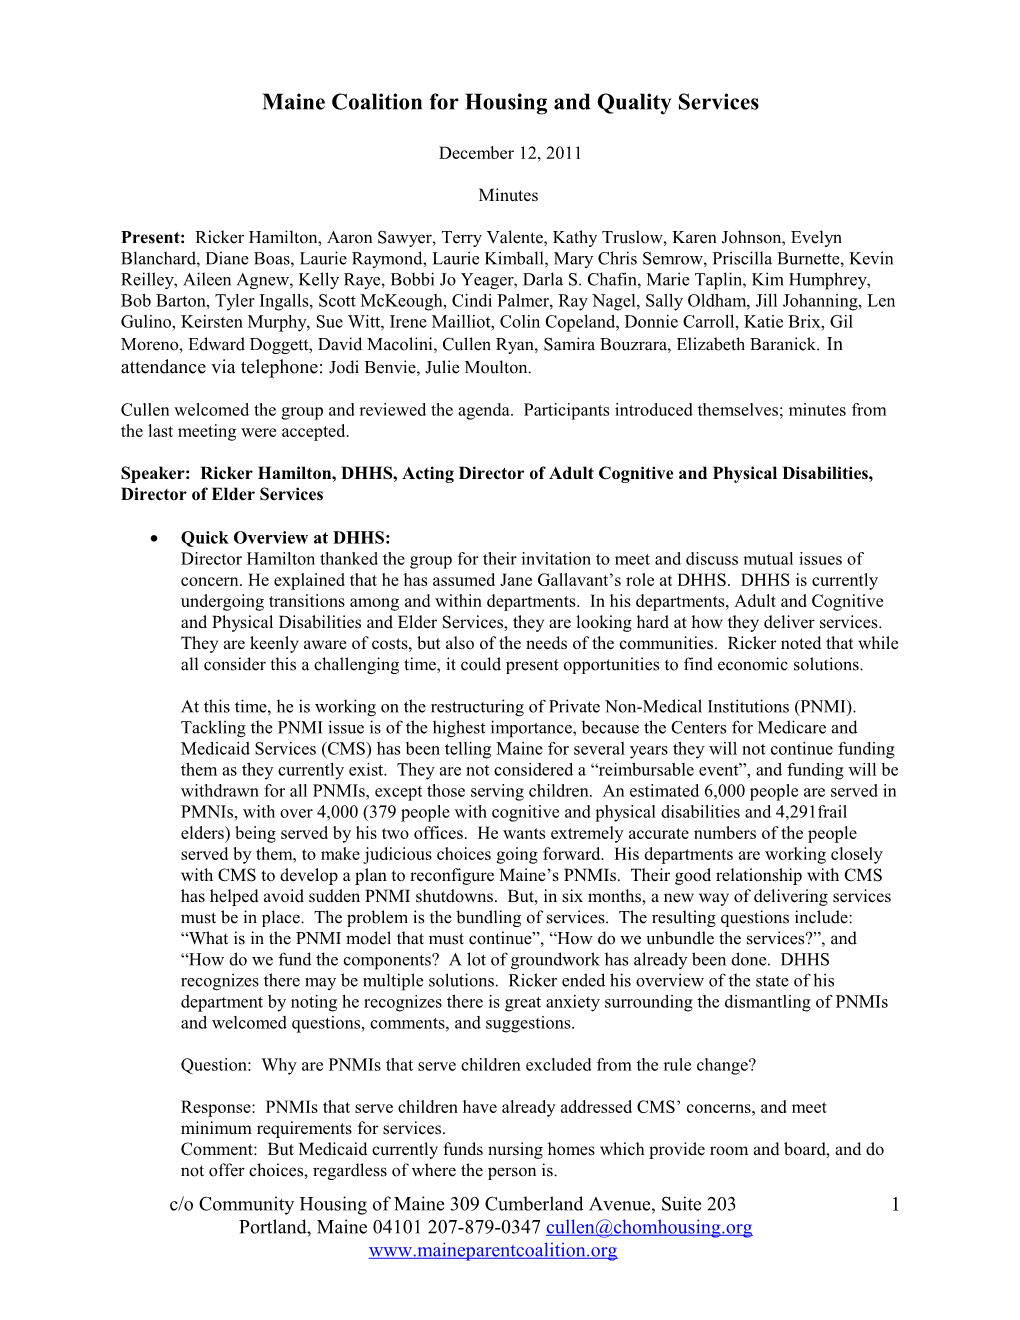 Maine Coalition for Housing and Quality Services s2